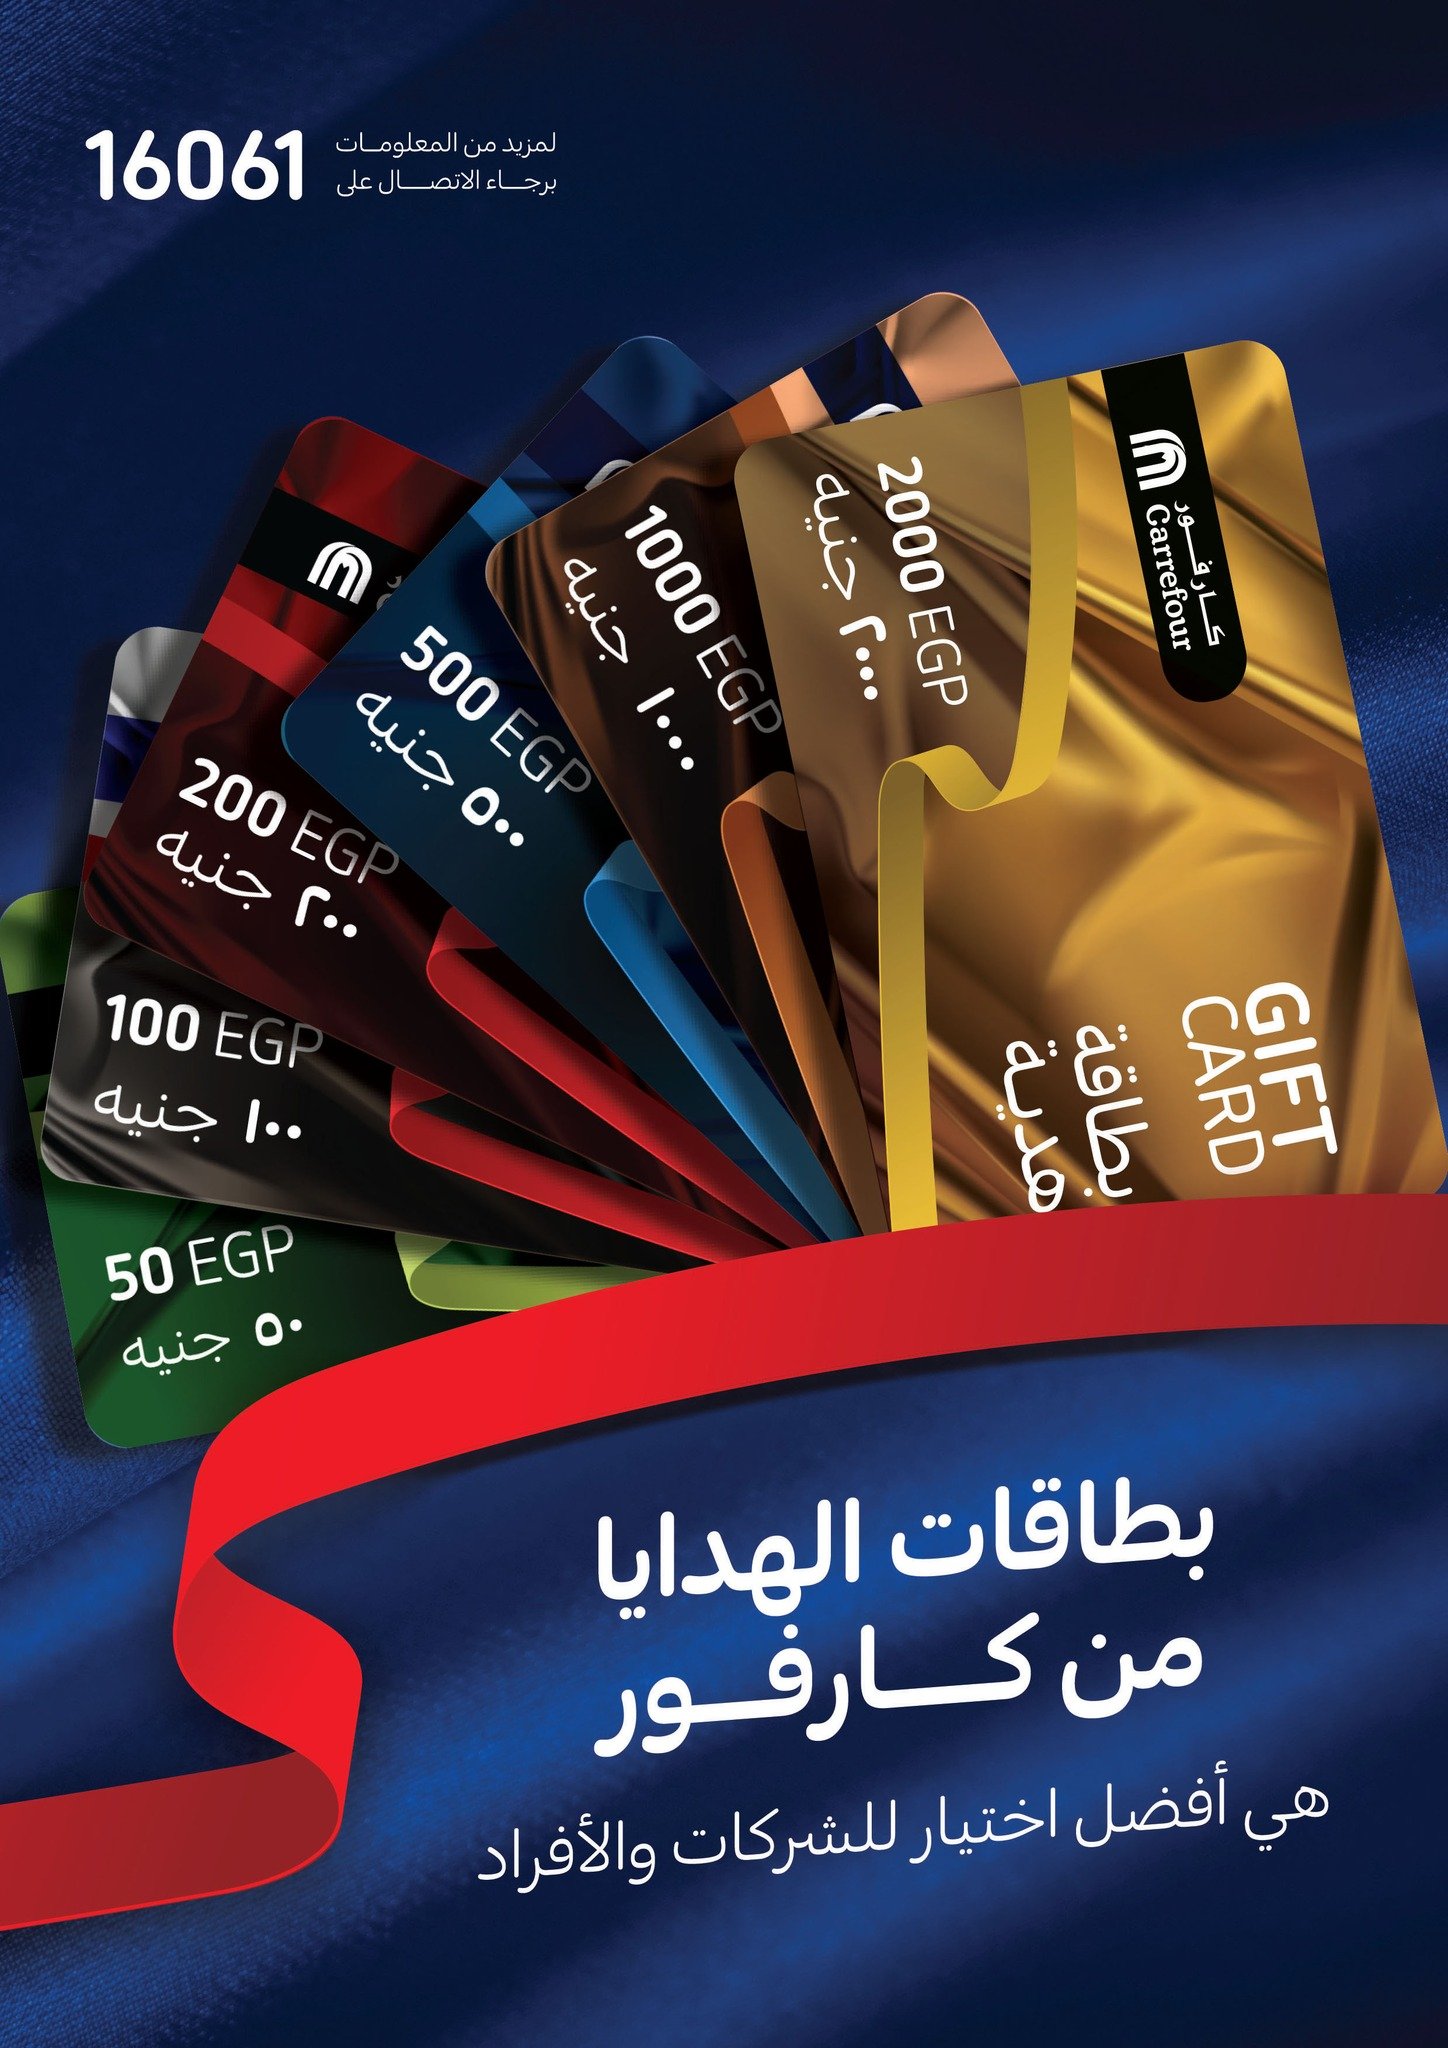 Page 19 at My Club Deals at Carrefour Egypt